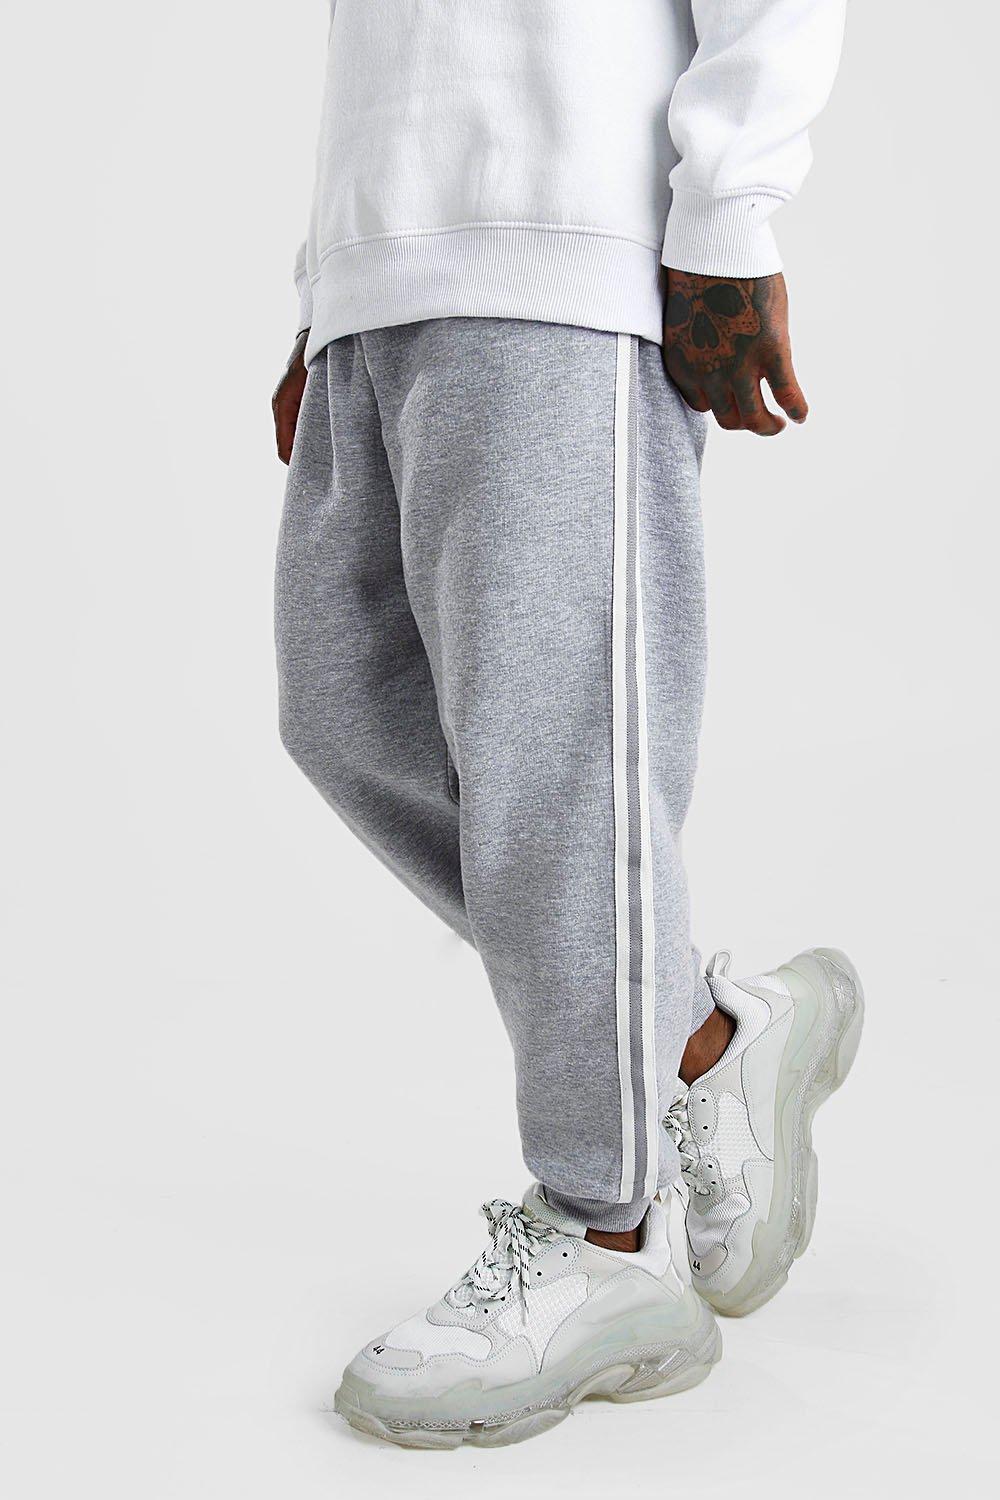 BoohooMAN Loose Fit Jogger With Side Tape in Grey (Gray) for Men - Lyst